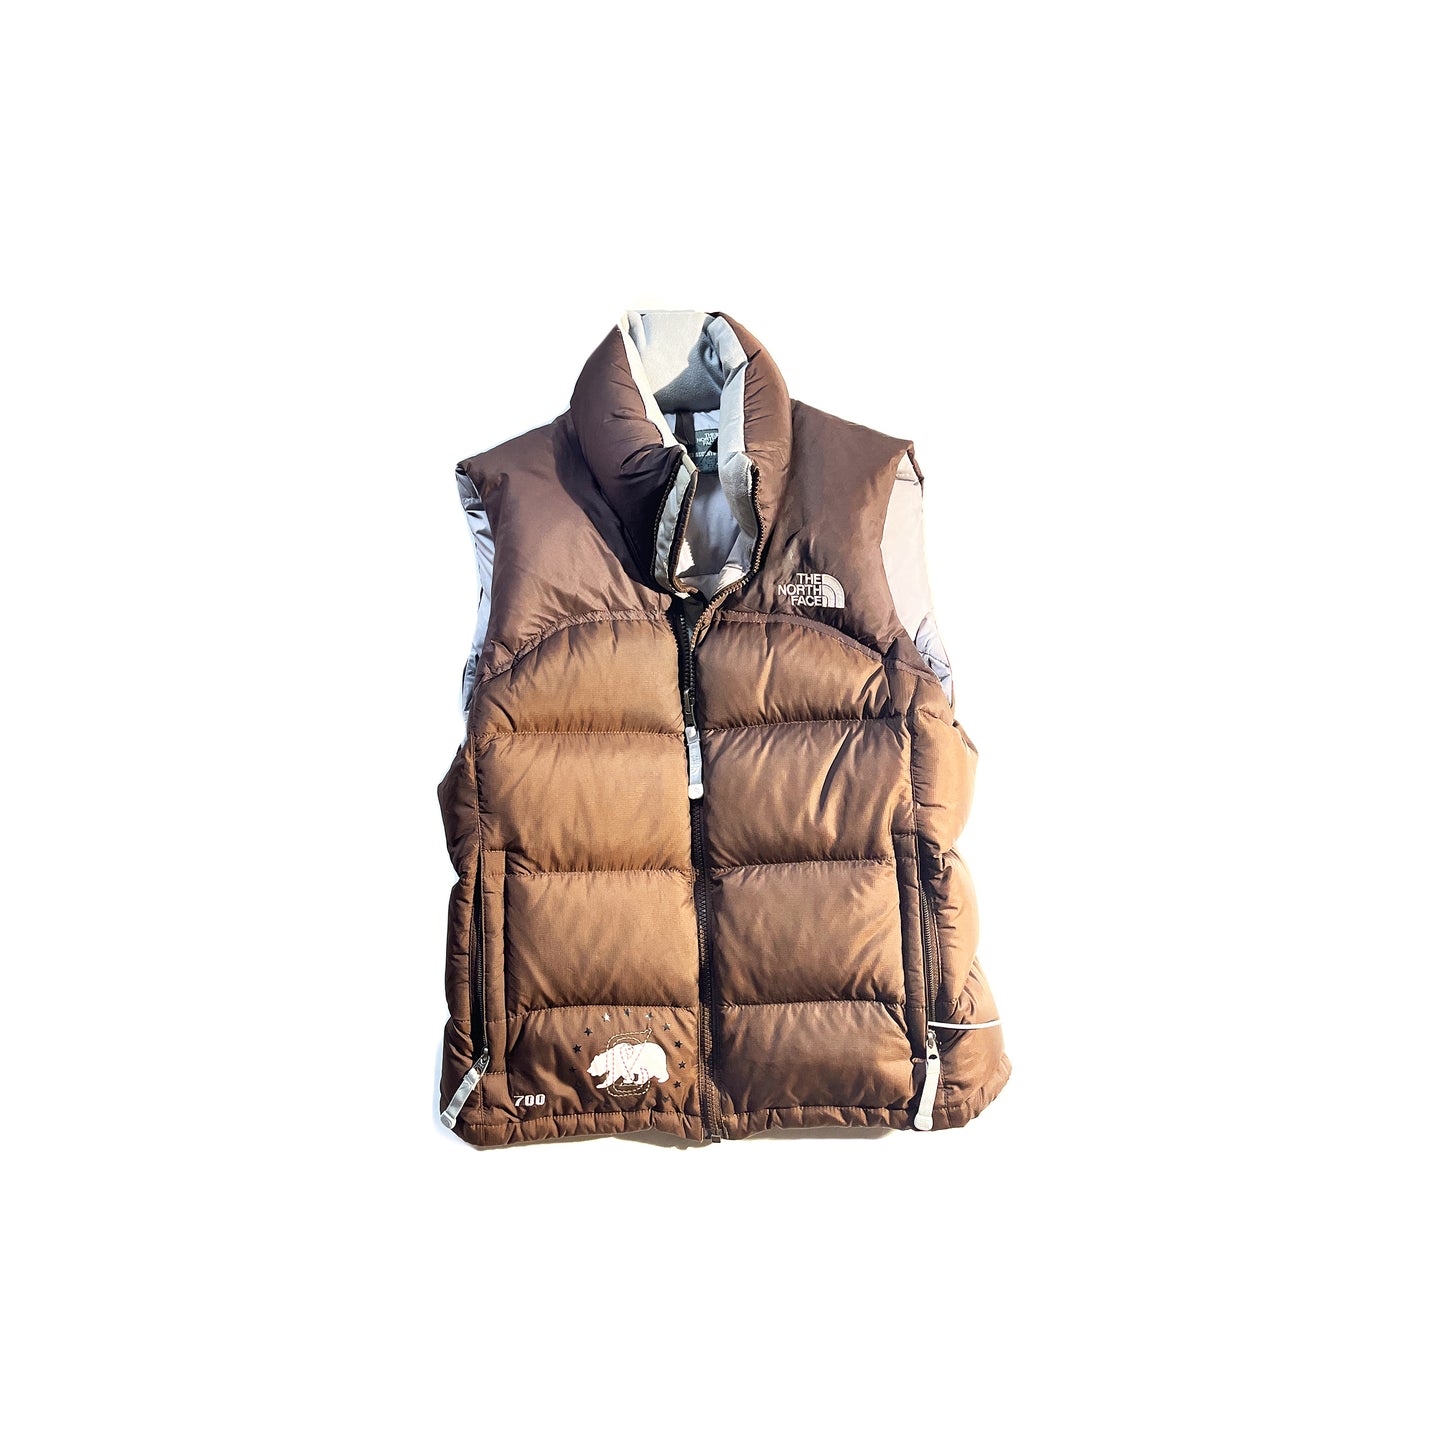 Vintage The North Face Vest 700 California Rep.